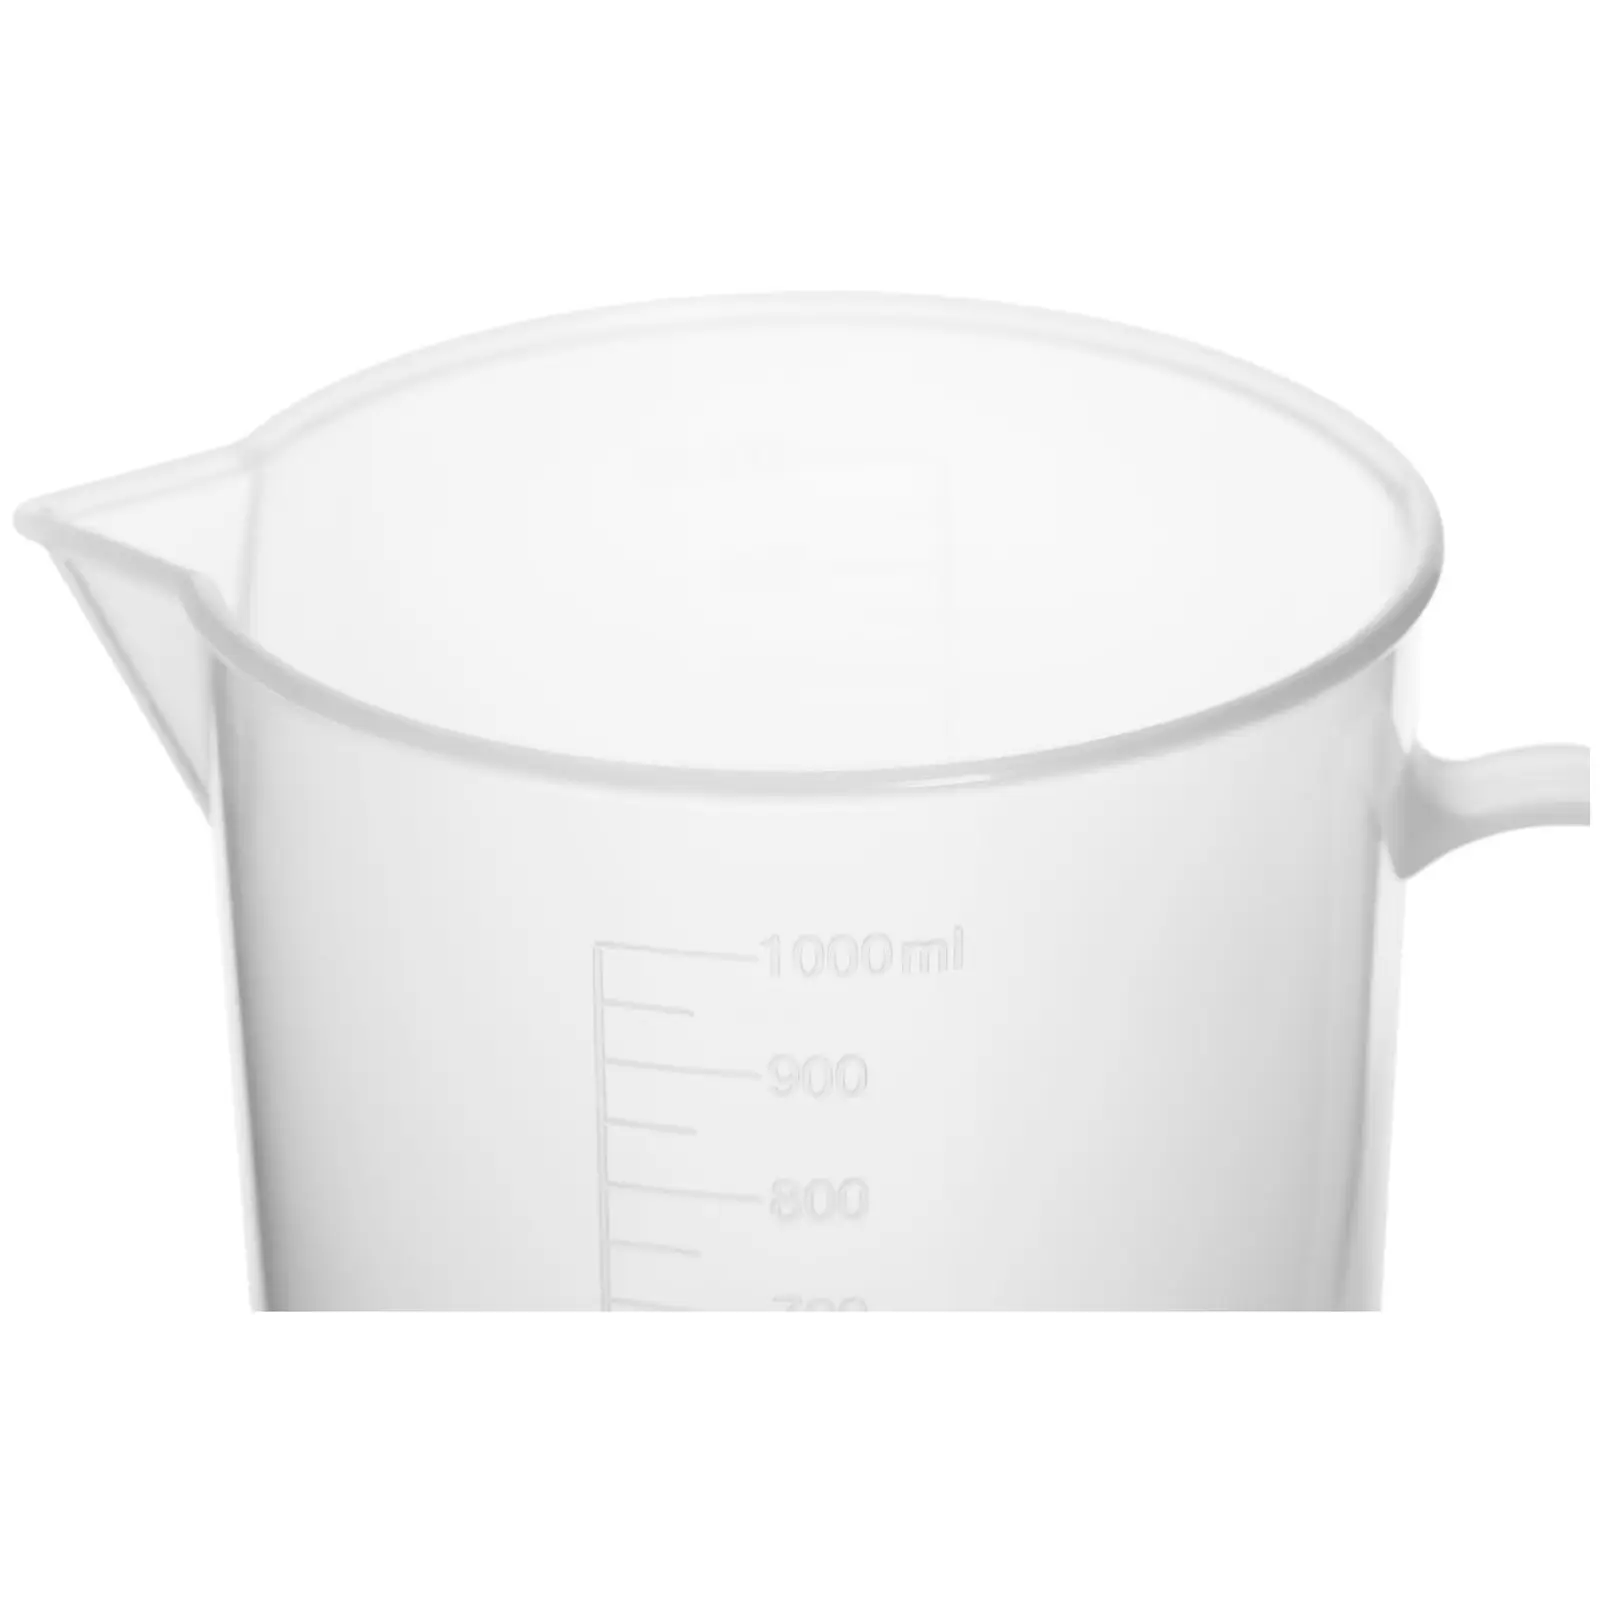 Laboratory Beaker - 10 pcs. - 1,000 ml - with spout and handle